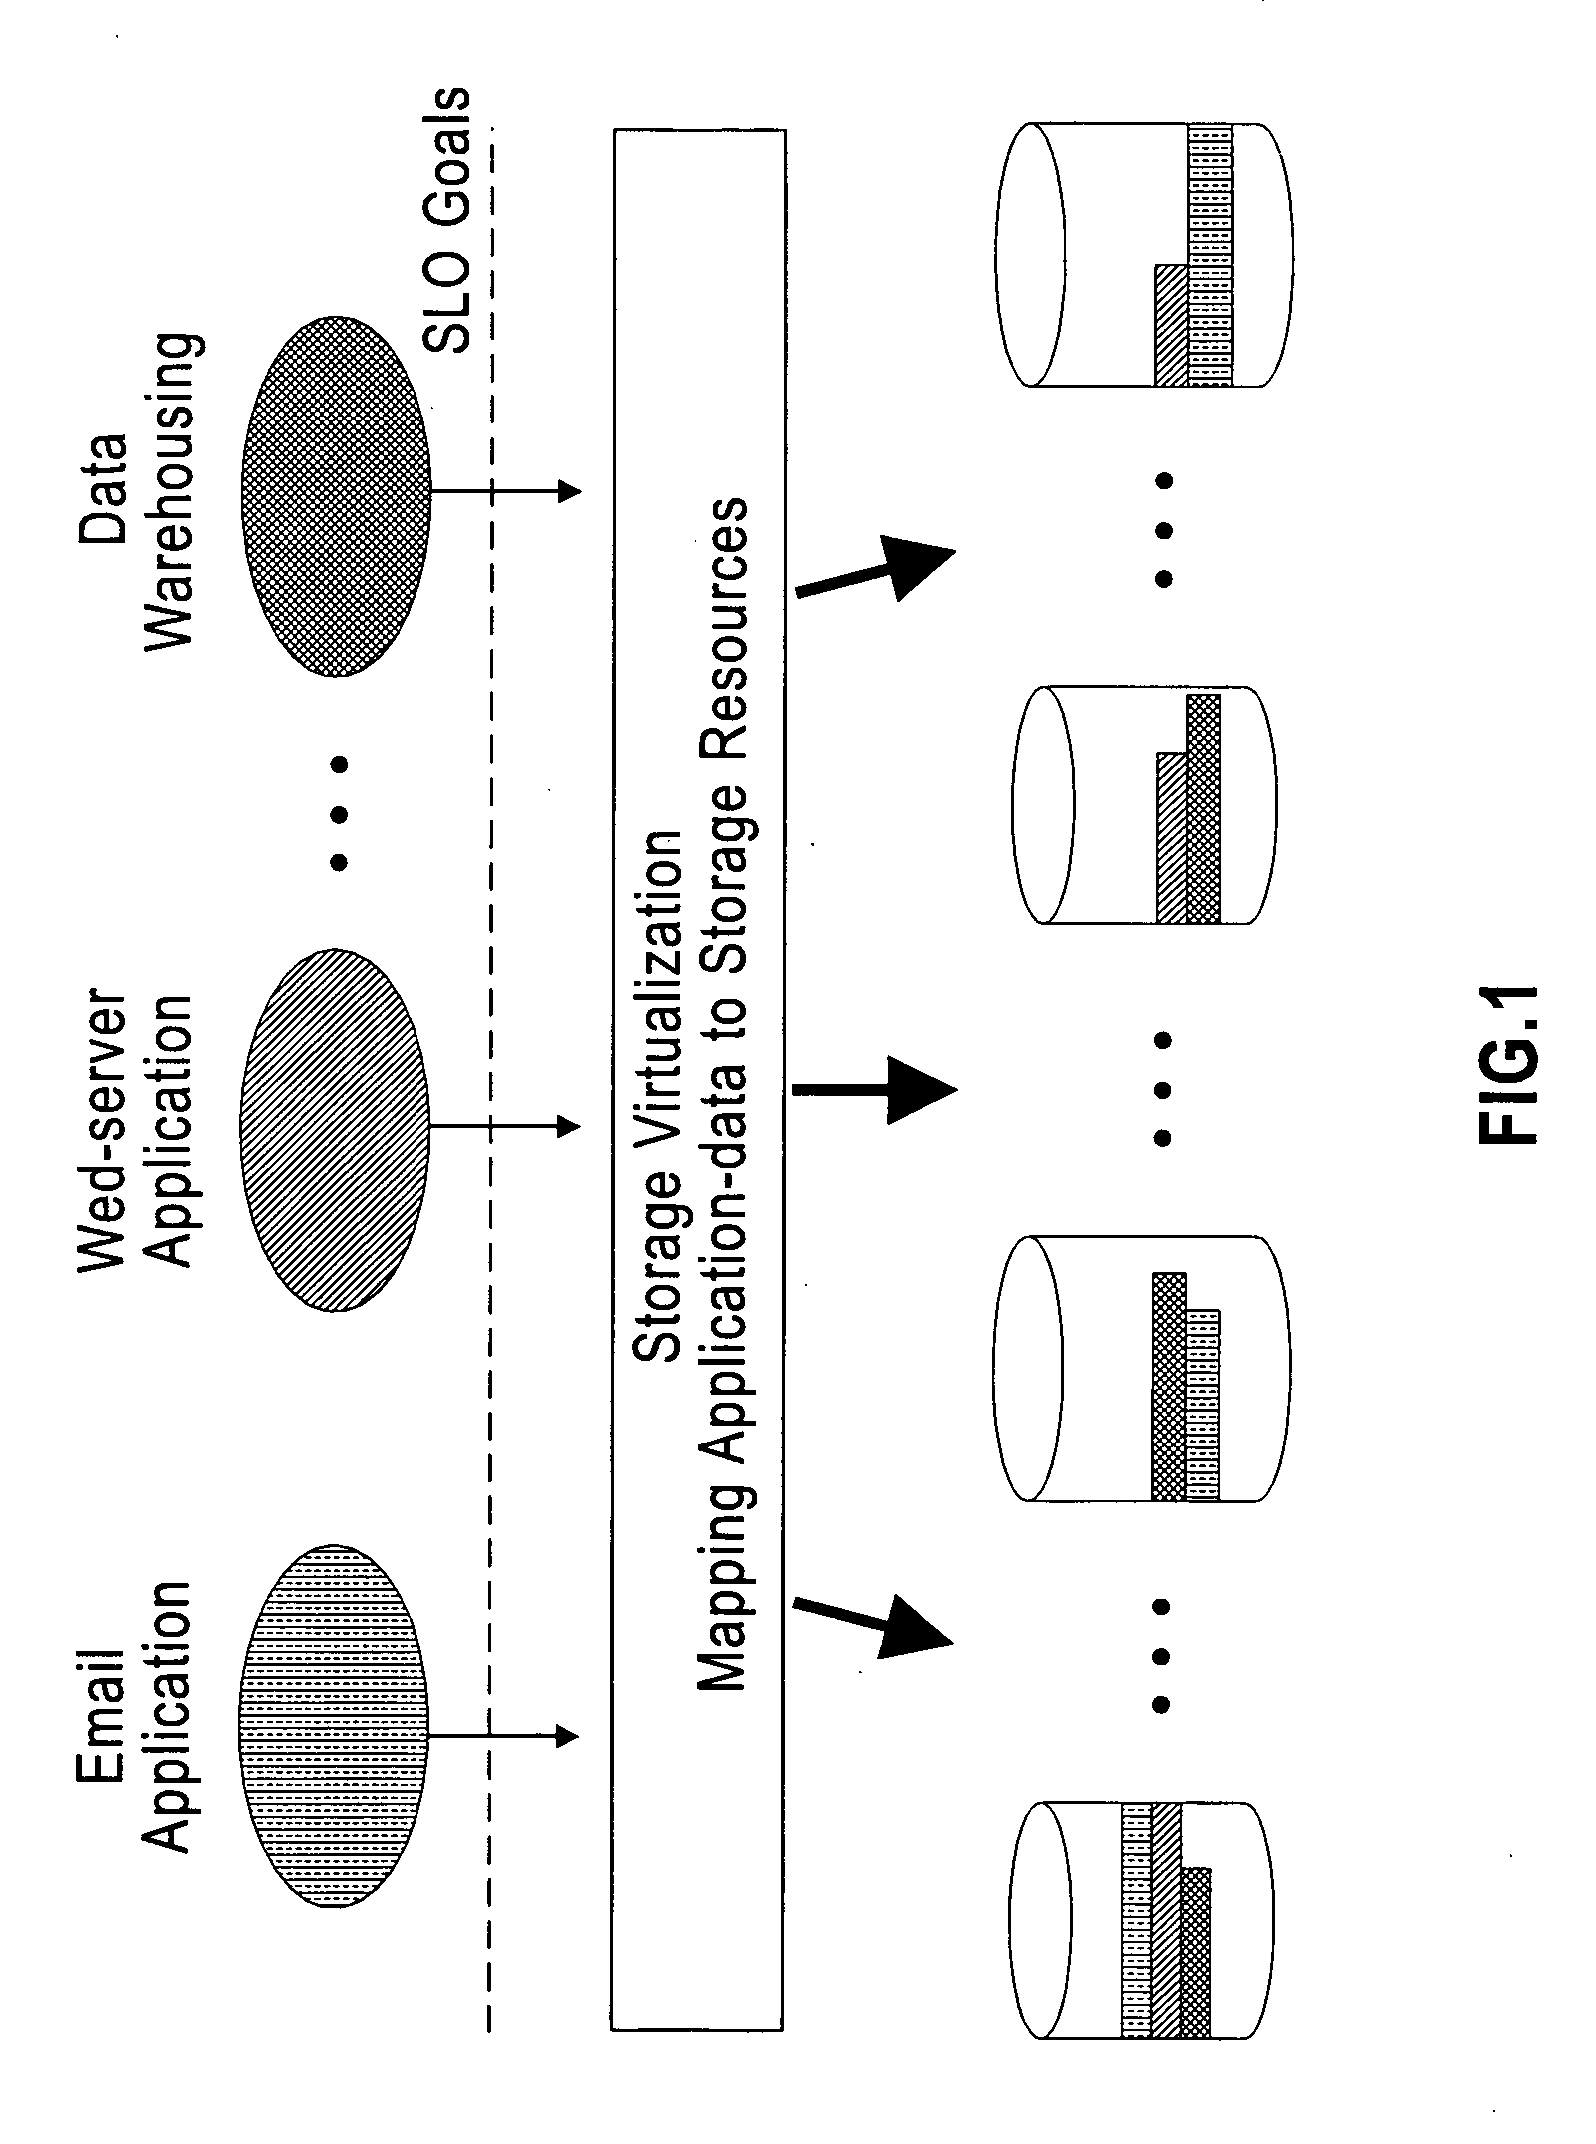 System and method to generate domain knowledge for automated system management by combining designer specifications with data mining activity